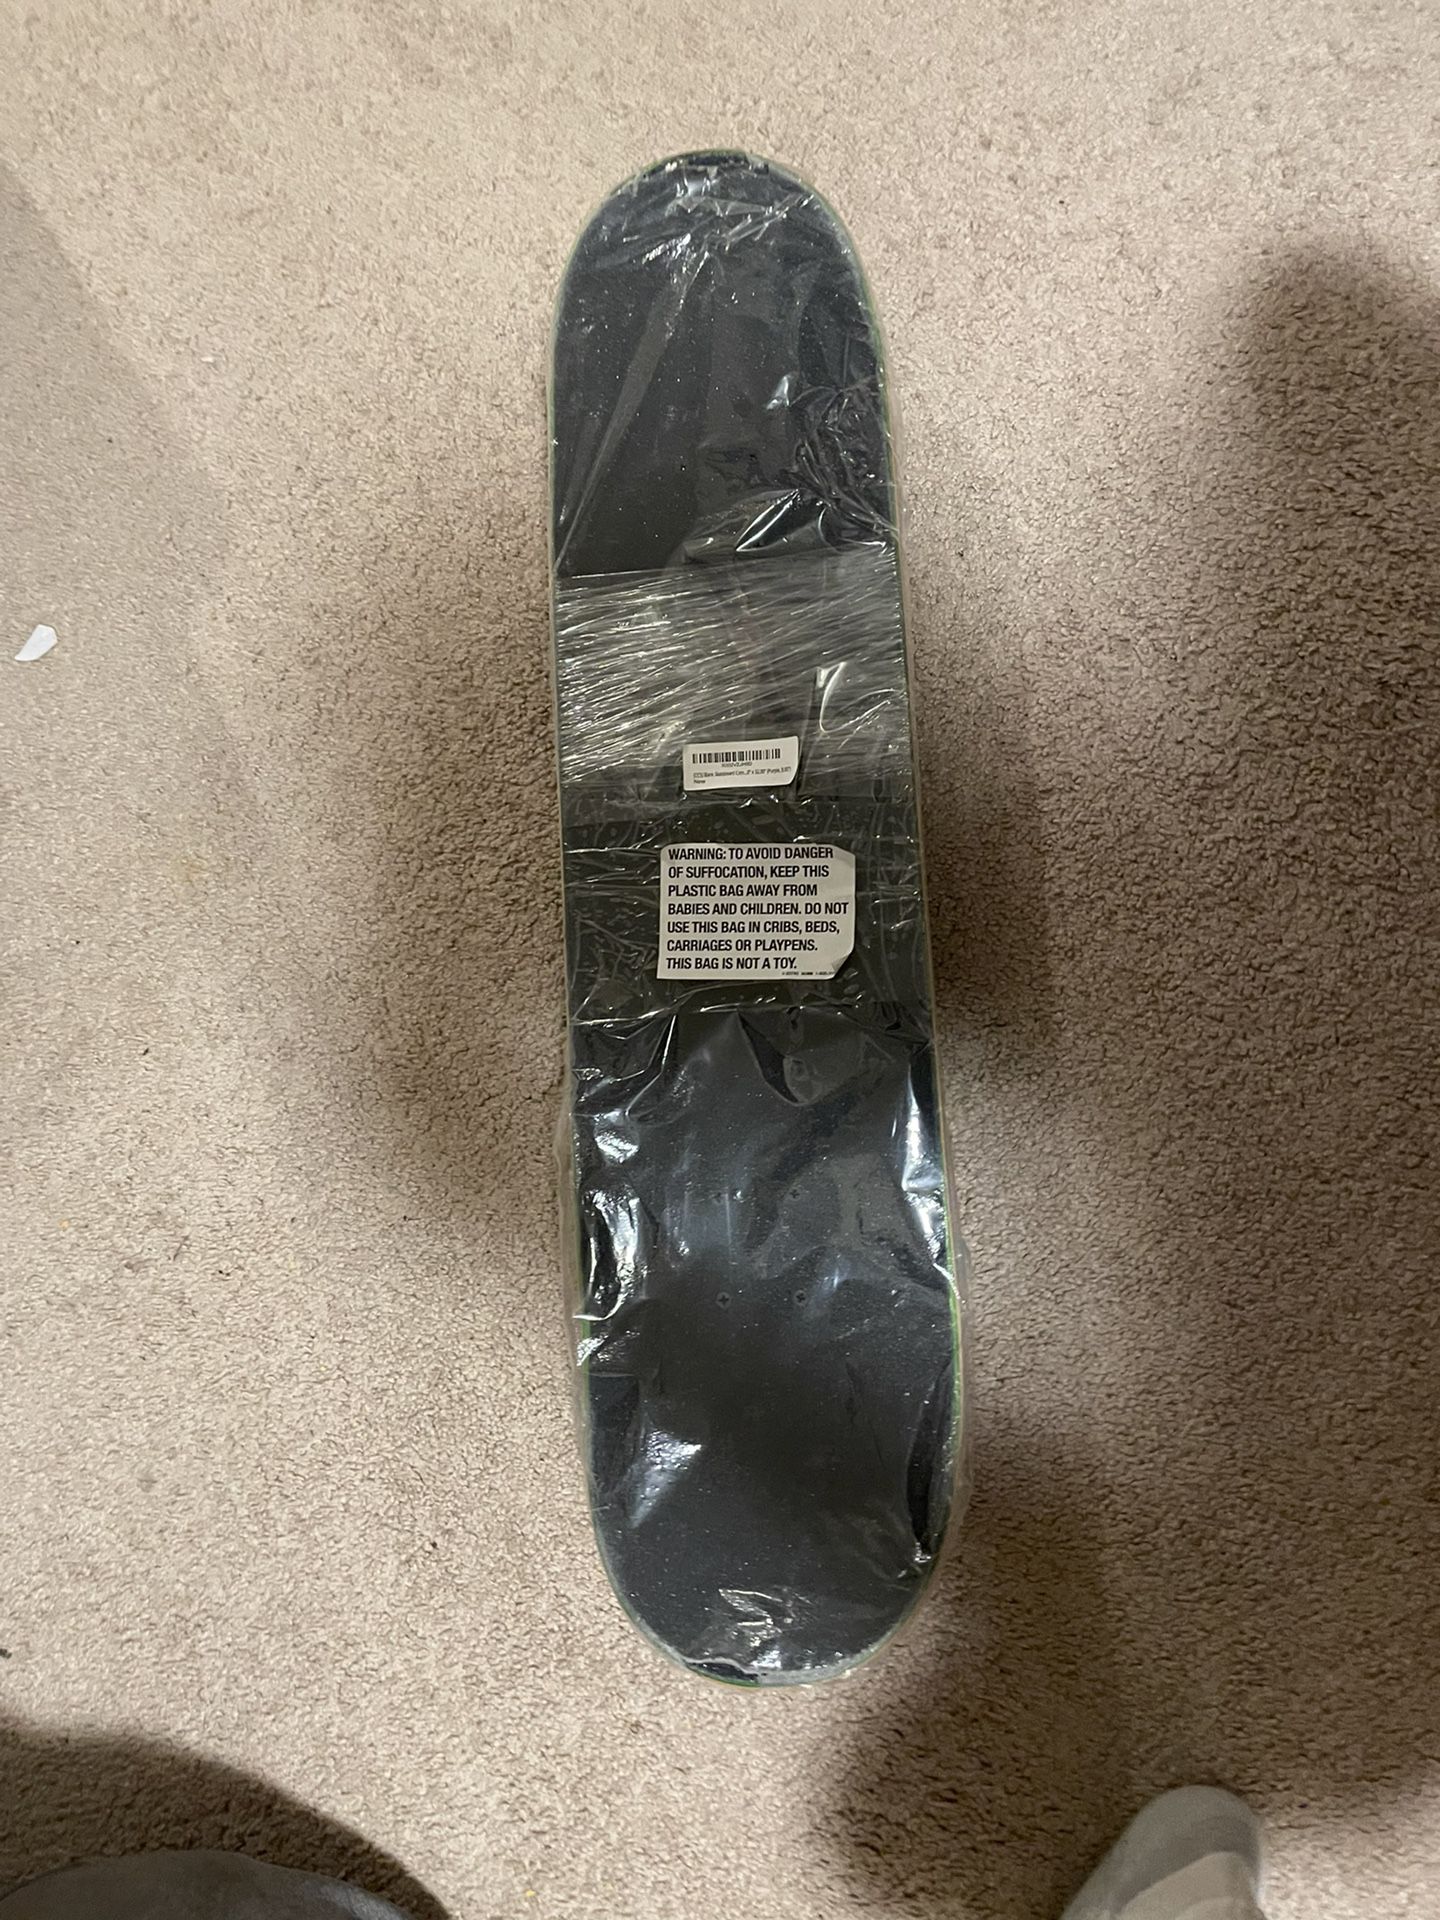 CCS SKATEBOARD 32” L 8” W Brand New Can Ship If Necessary